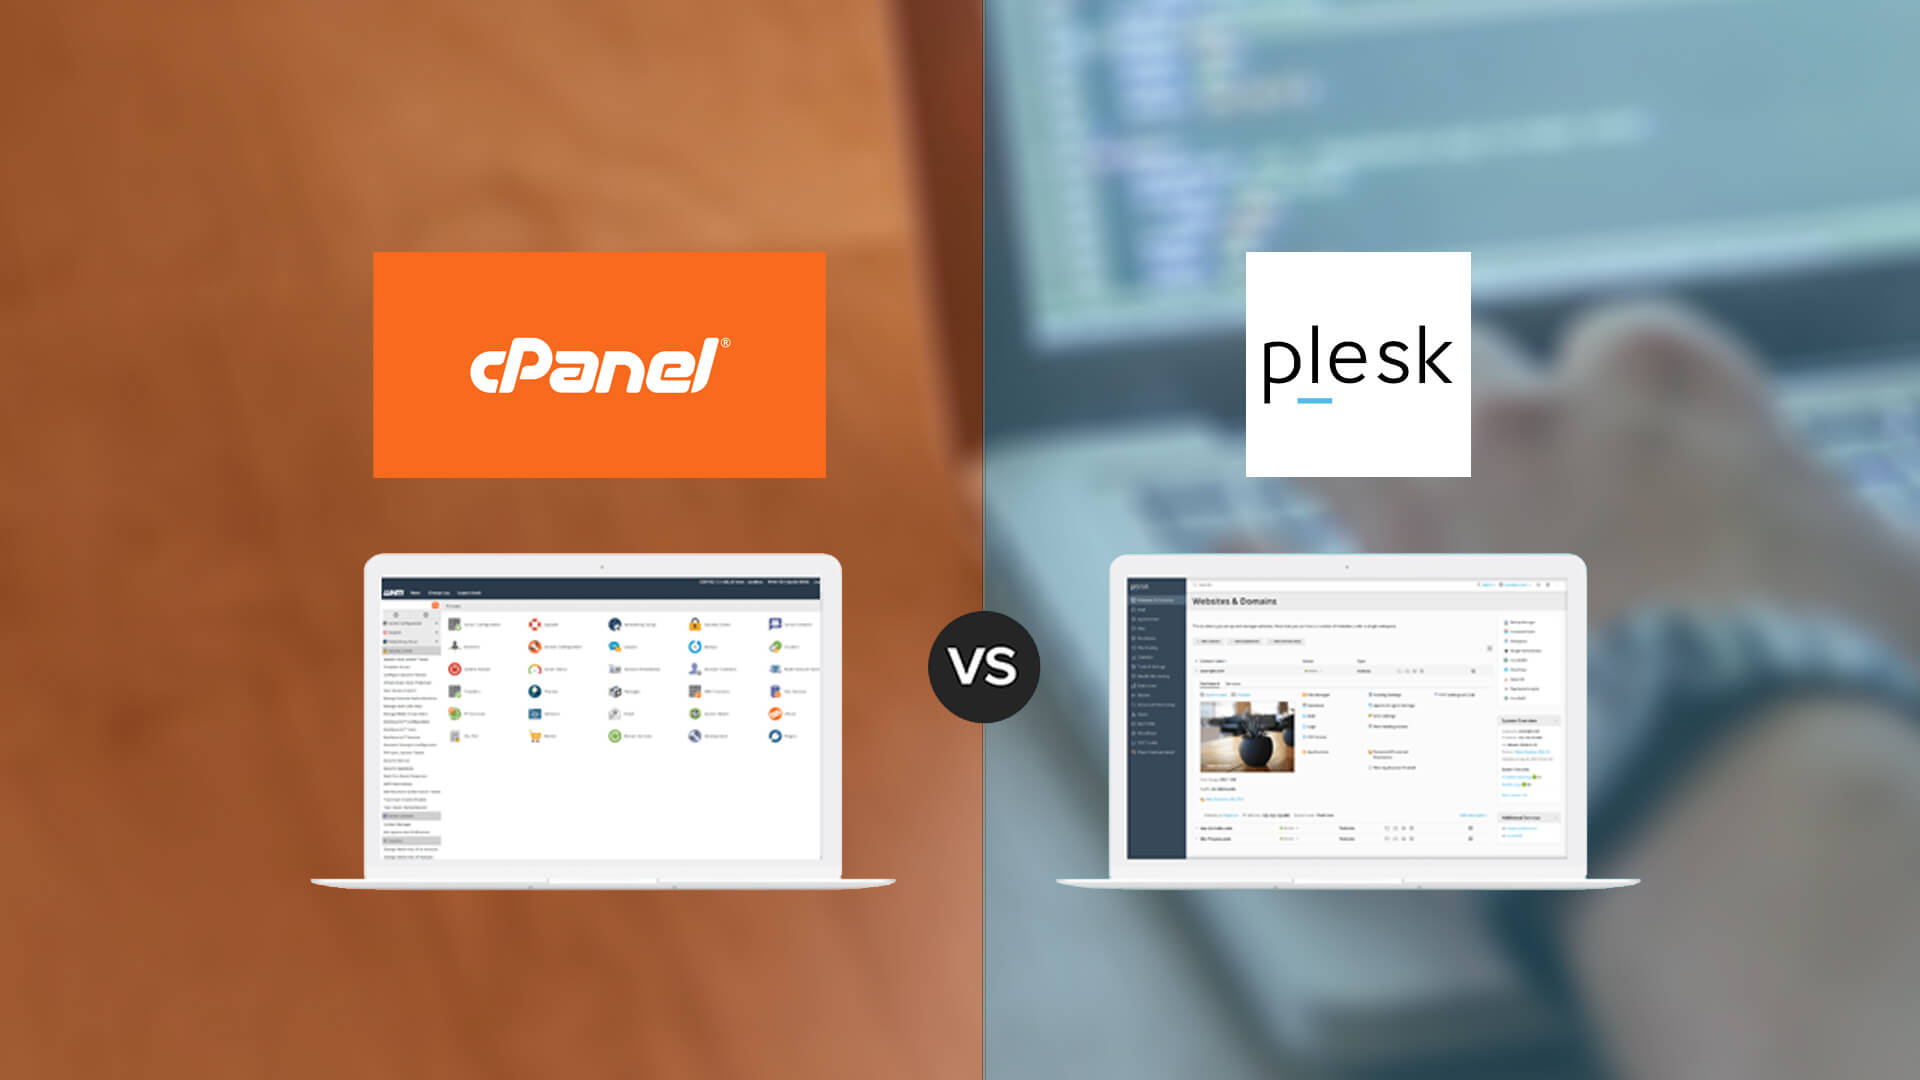 Plesk vs cPanel: Which control panel is better for you?